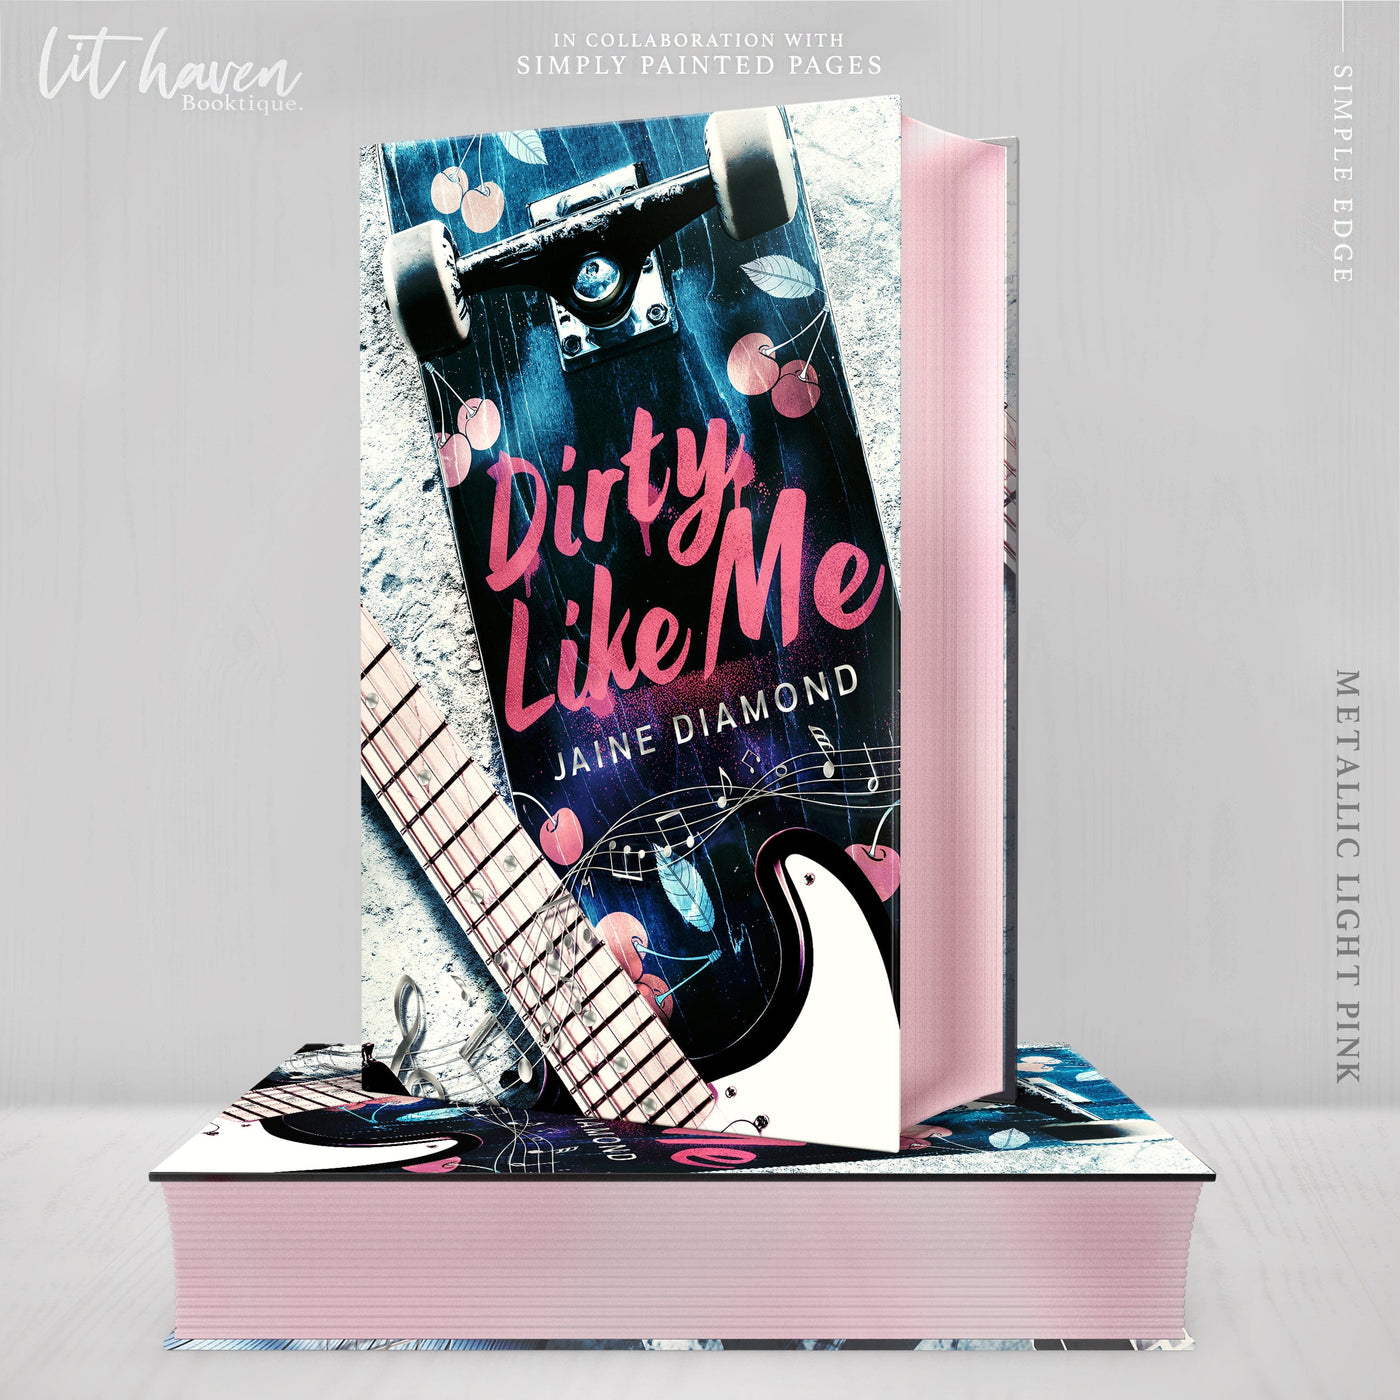 Lit Haven Booktique Book Waitlist - Dirty Like Me Exclusive Hardcover